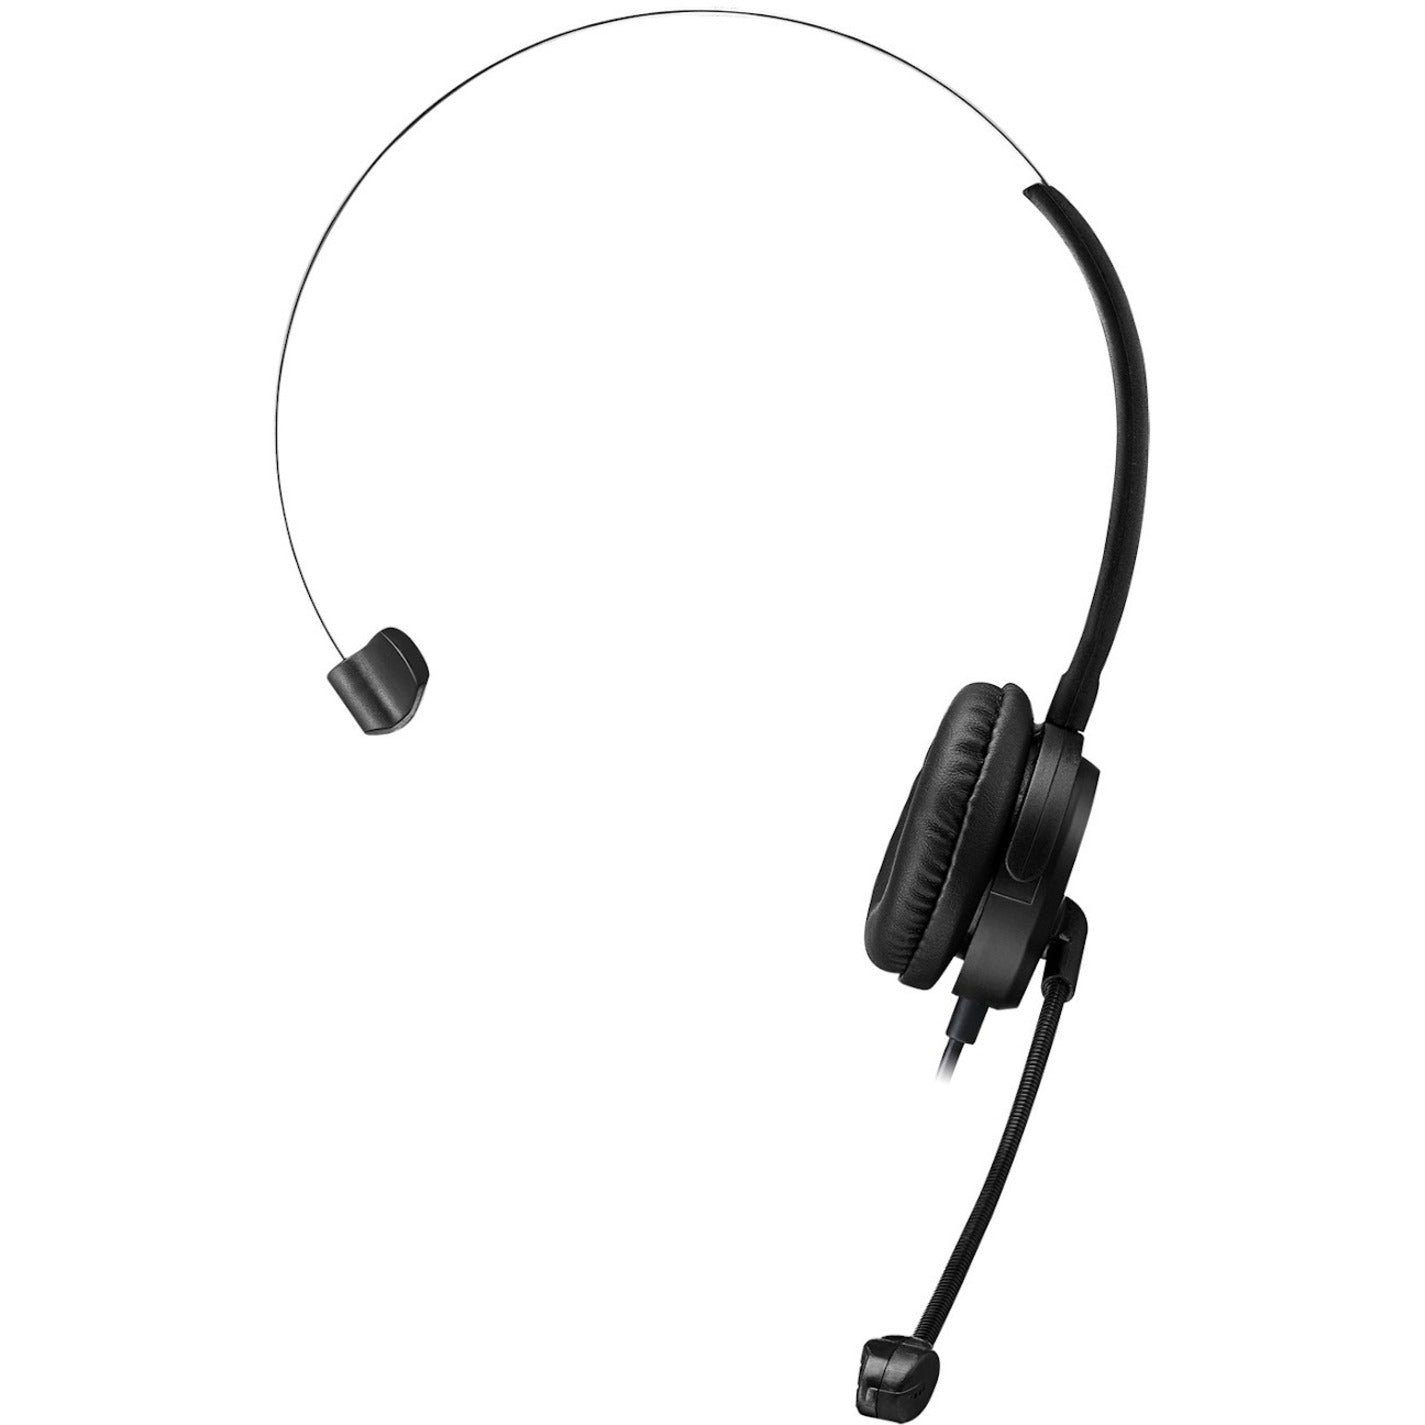 Adesso XTREAM P1 USB Single-Sided Headset with Adjustable Microphone, Wired Mono Headset